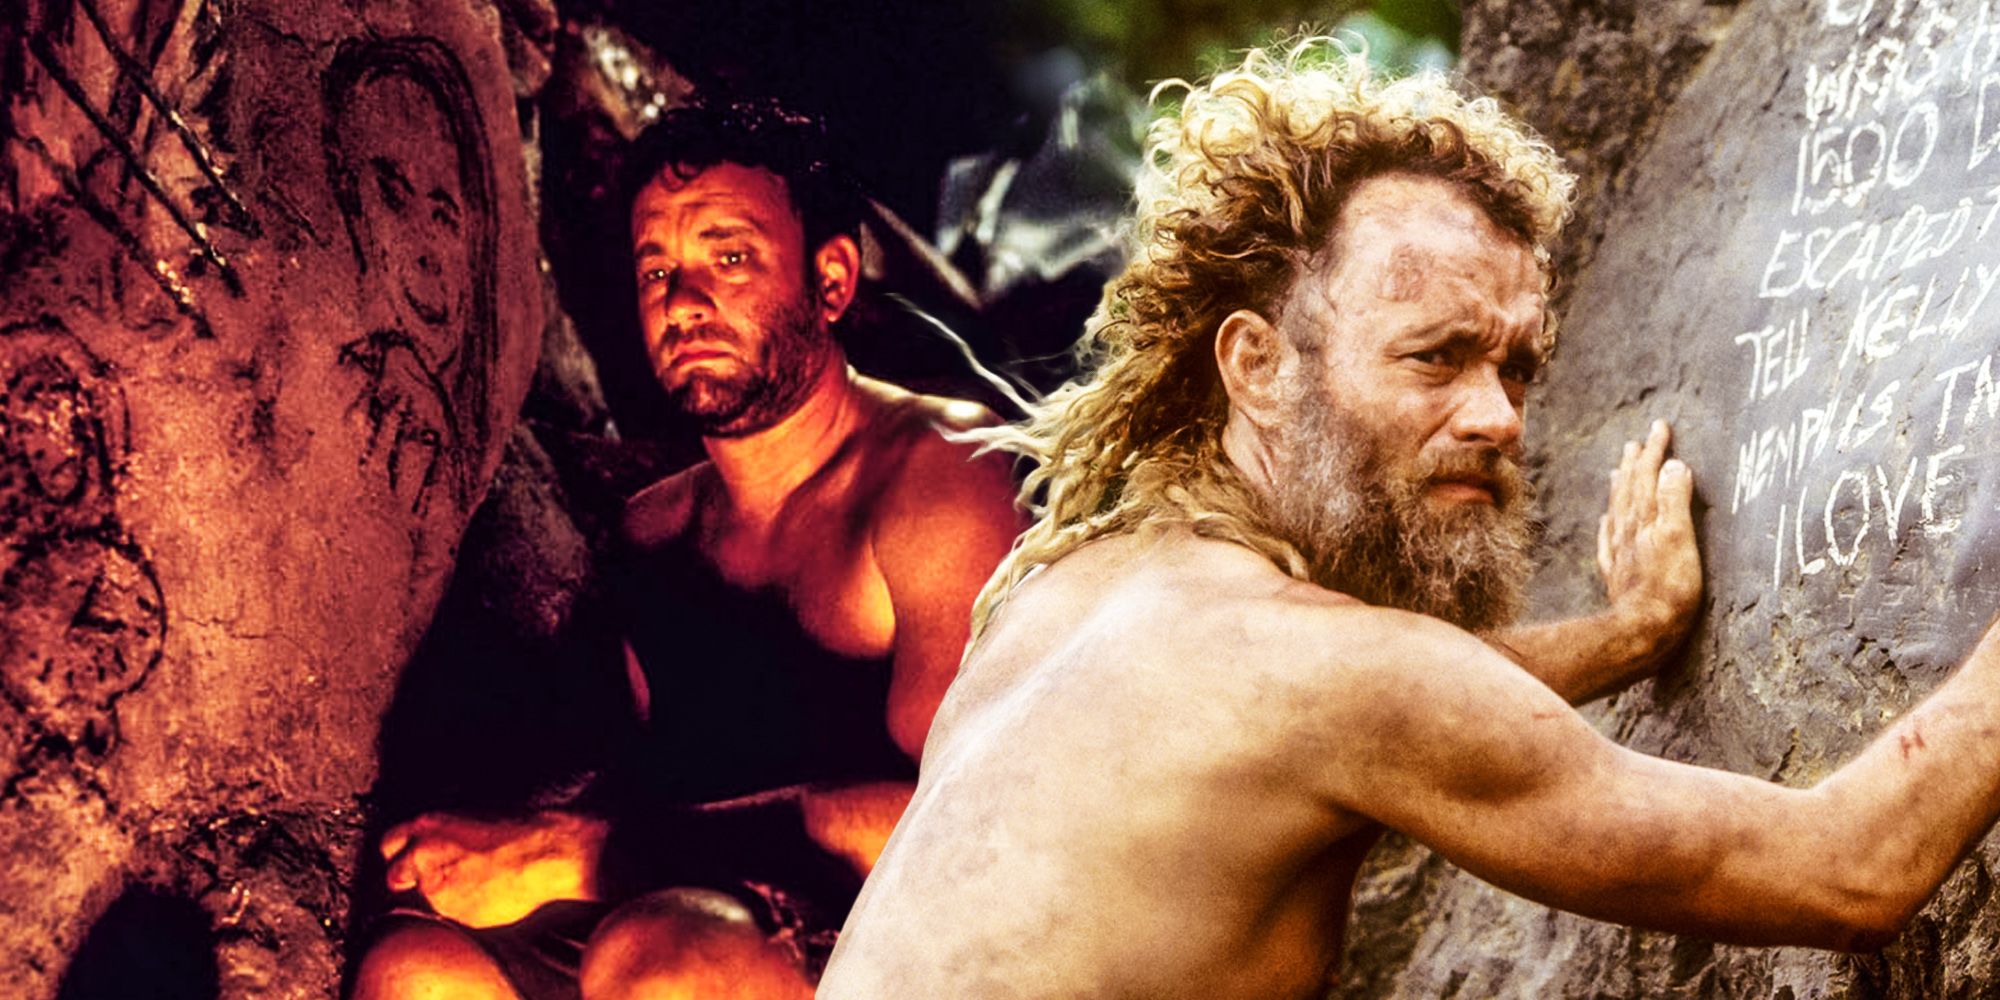 Cast away meaning of chucks cave scenes